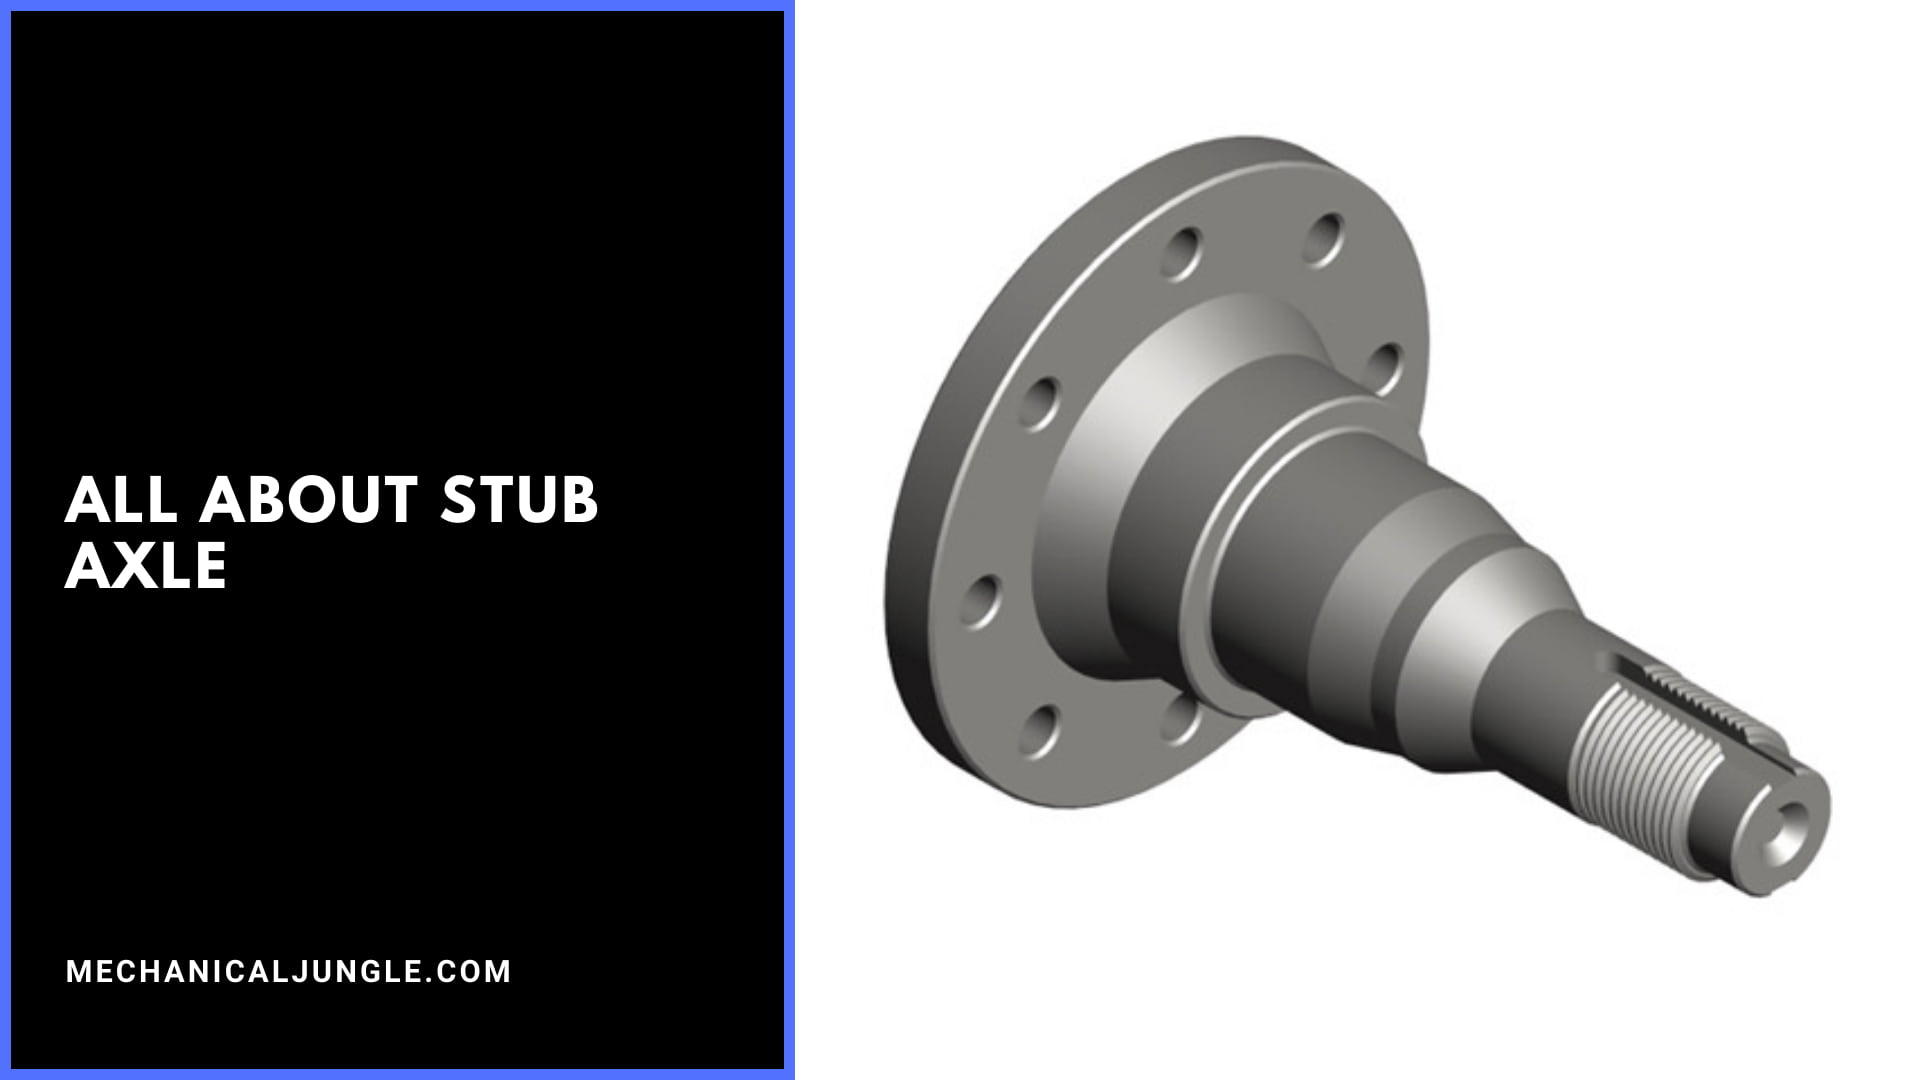 All About Stub Axle